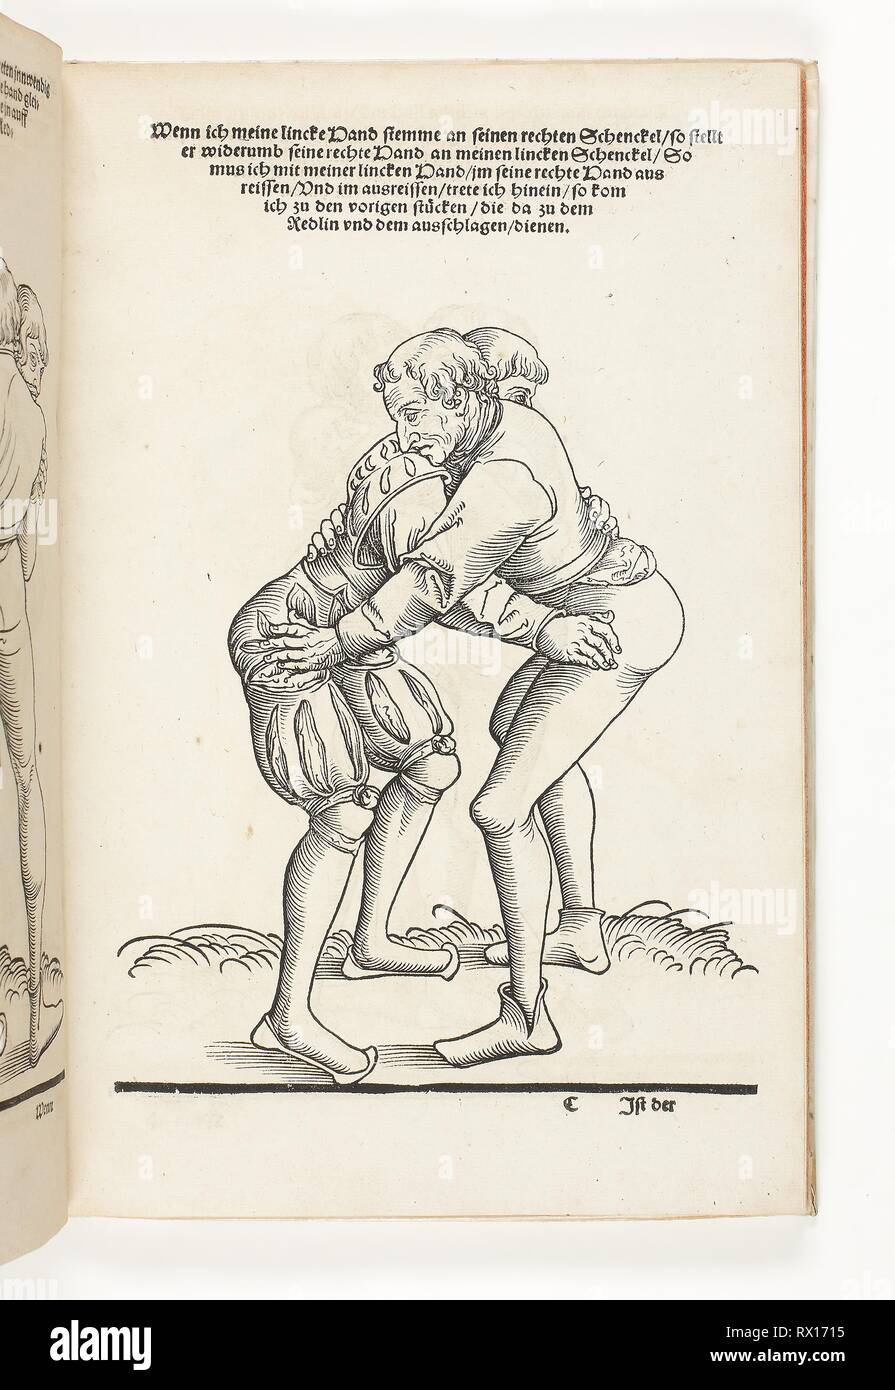 The Art of Wrestling: Eighty-Five Pieces (Ringer Kunst: Fünff und Achtzig Stücke). Lucas Cranach the Younger (German, 1515-1586); written by Fabian von Auerswald (German, born 1462); printed by Hans Lufft (German, 1495-1584). Date: 1539. Dimensions: 301 × 195 × 16 mm. Book with woodcuts and letterpress in black on cream laid paper. Origin: Germany. Museum: The Chicago Art Institute. Author: II Lucas Cranach. Stock Photo